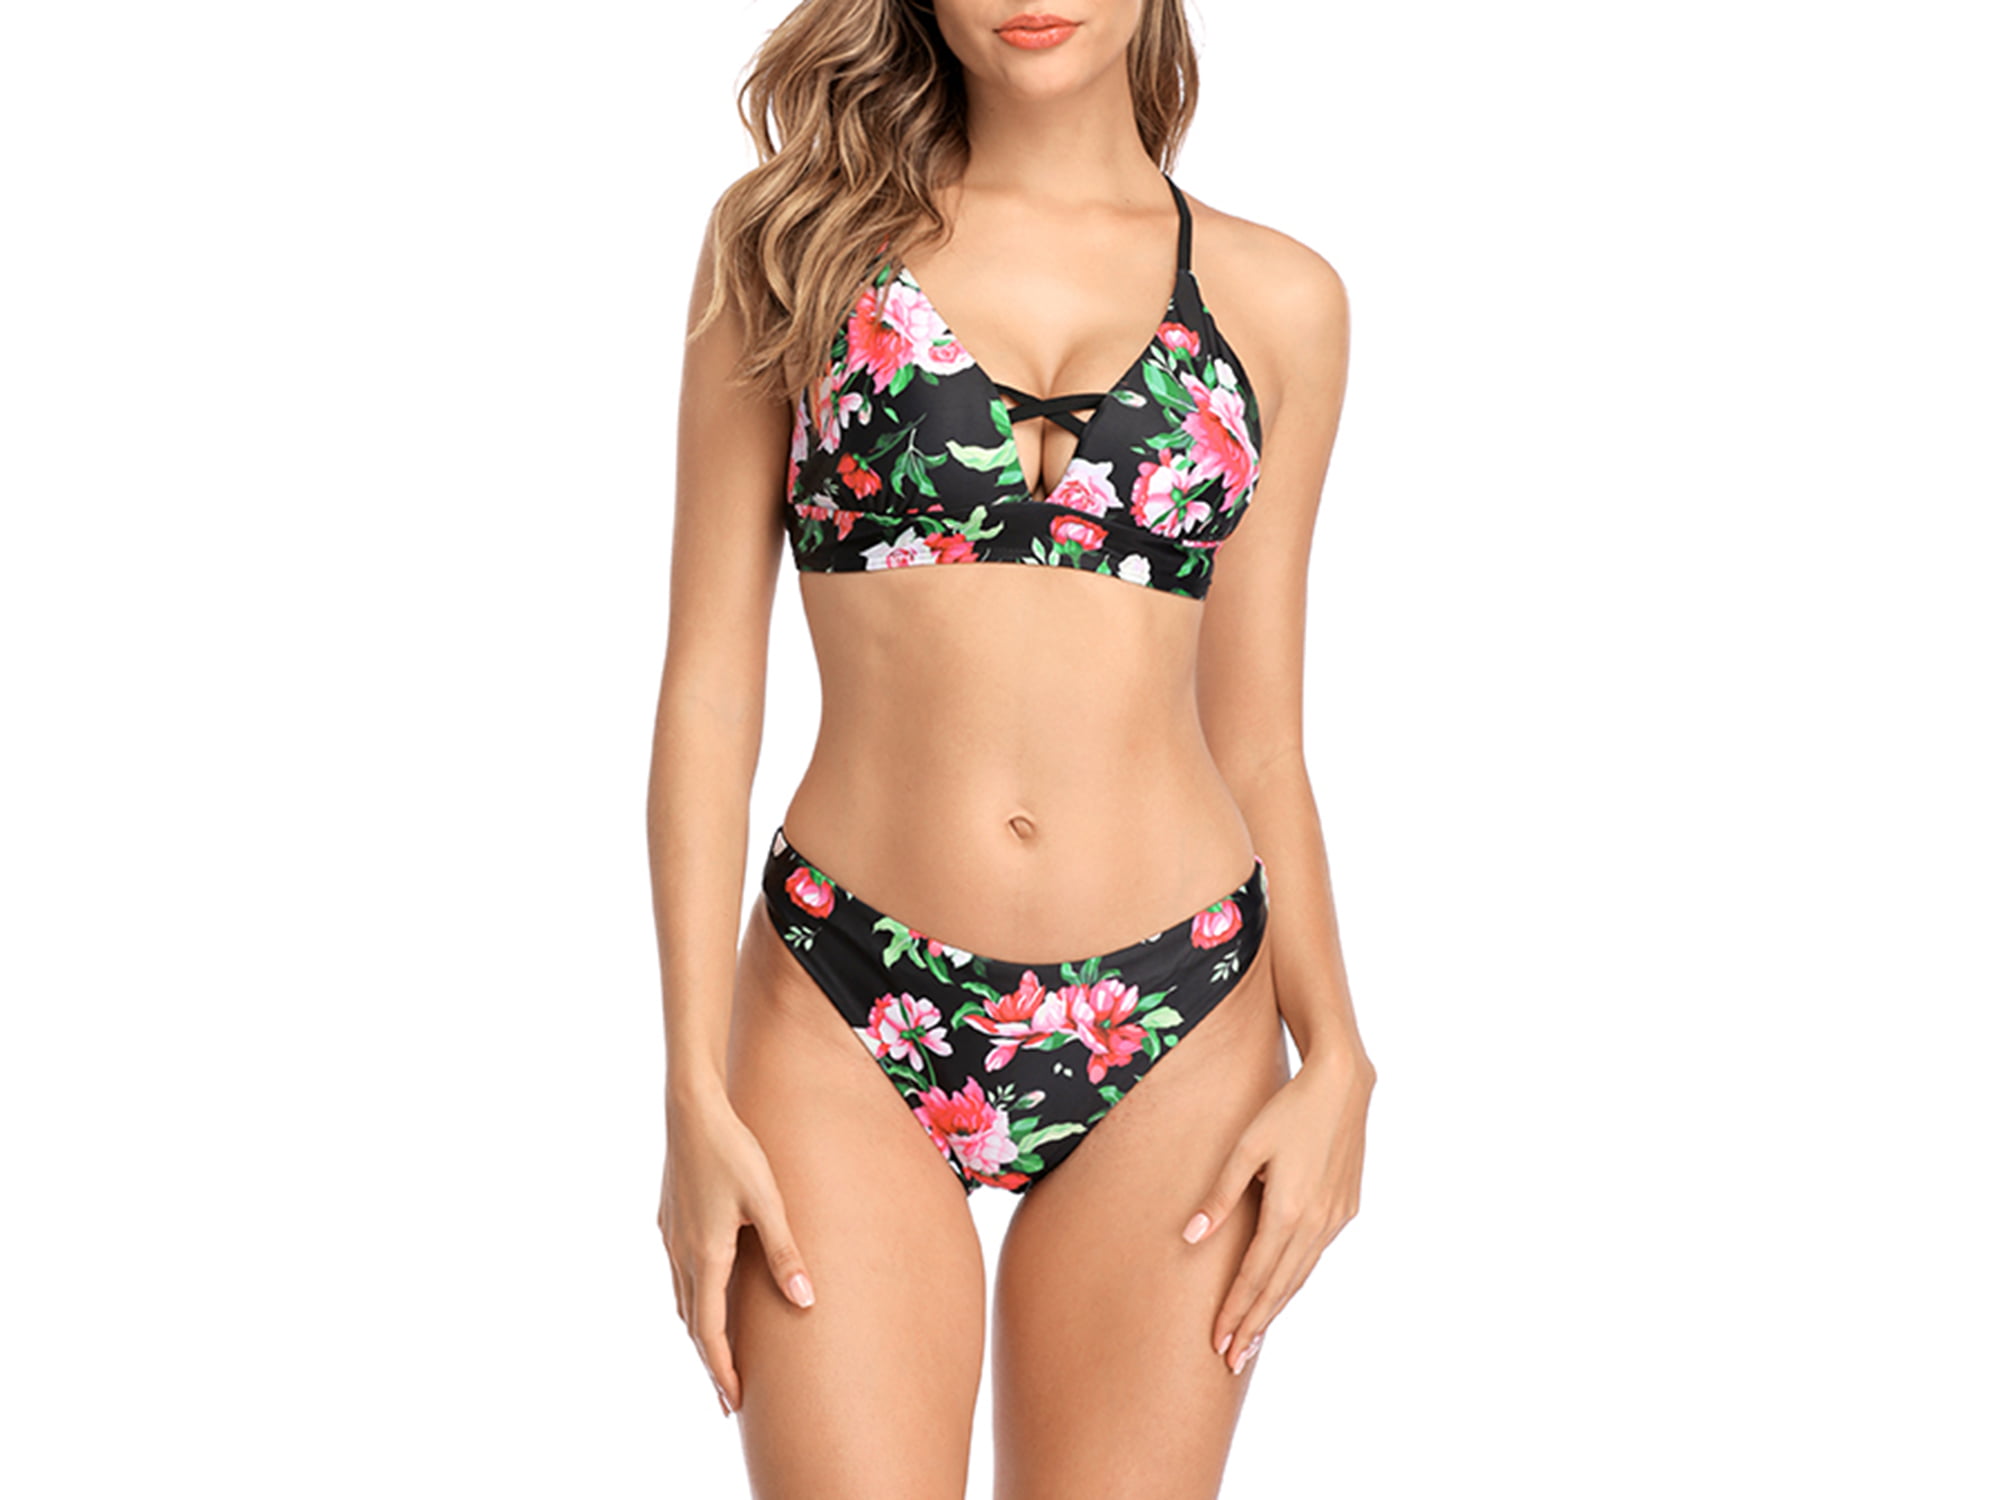 Reversible two piece bathing suit